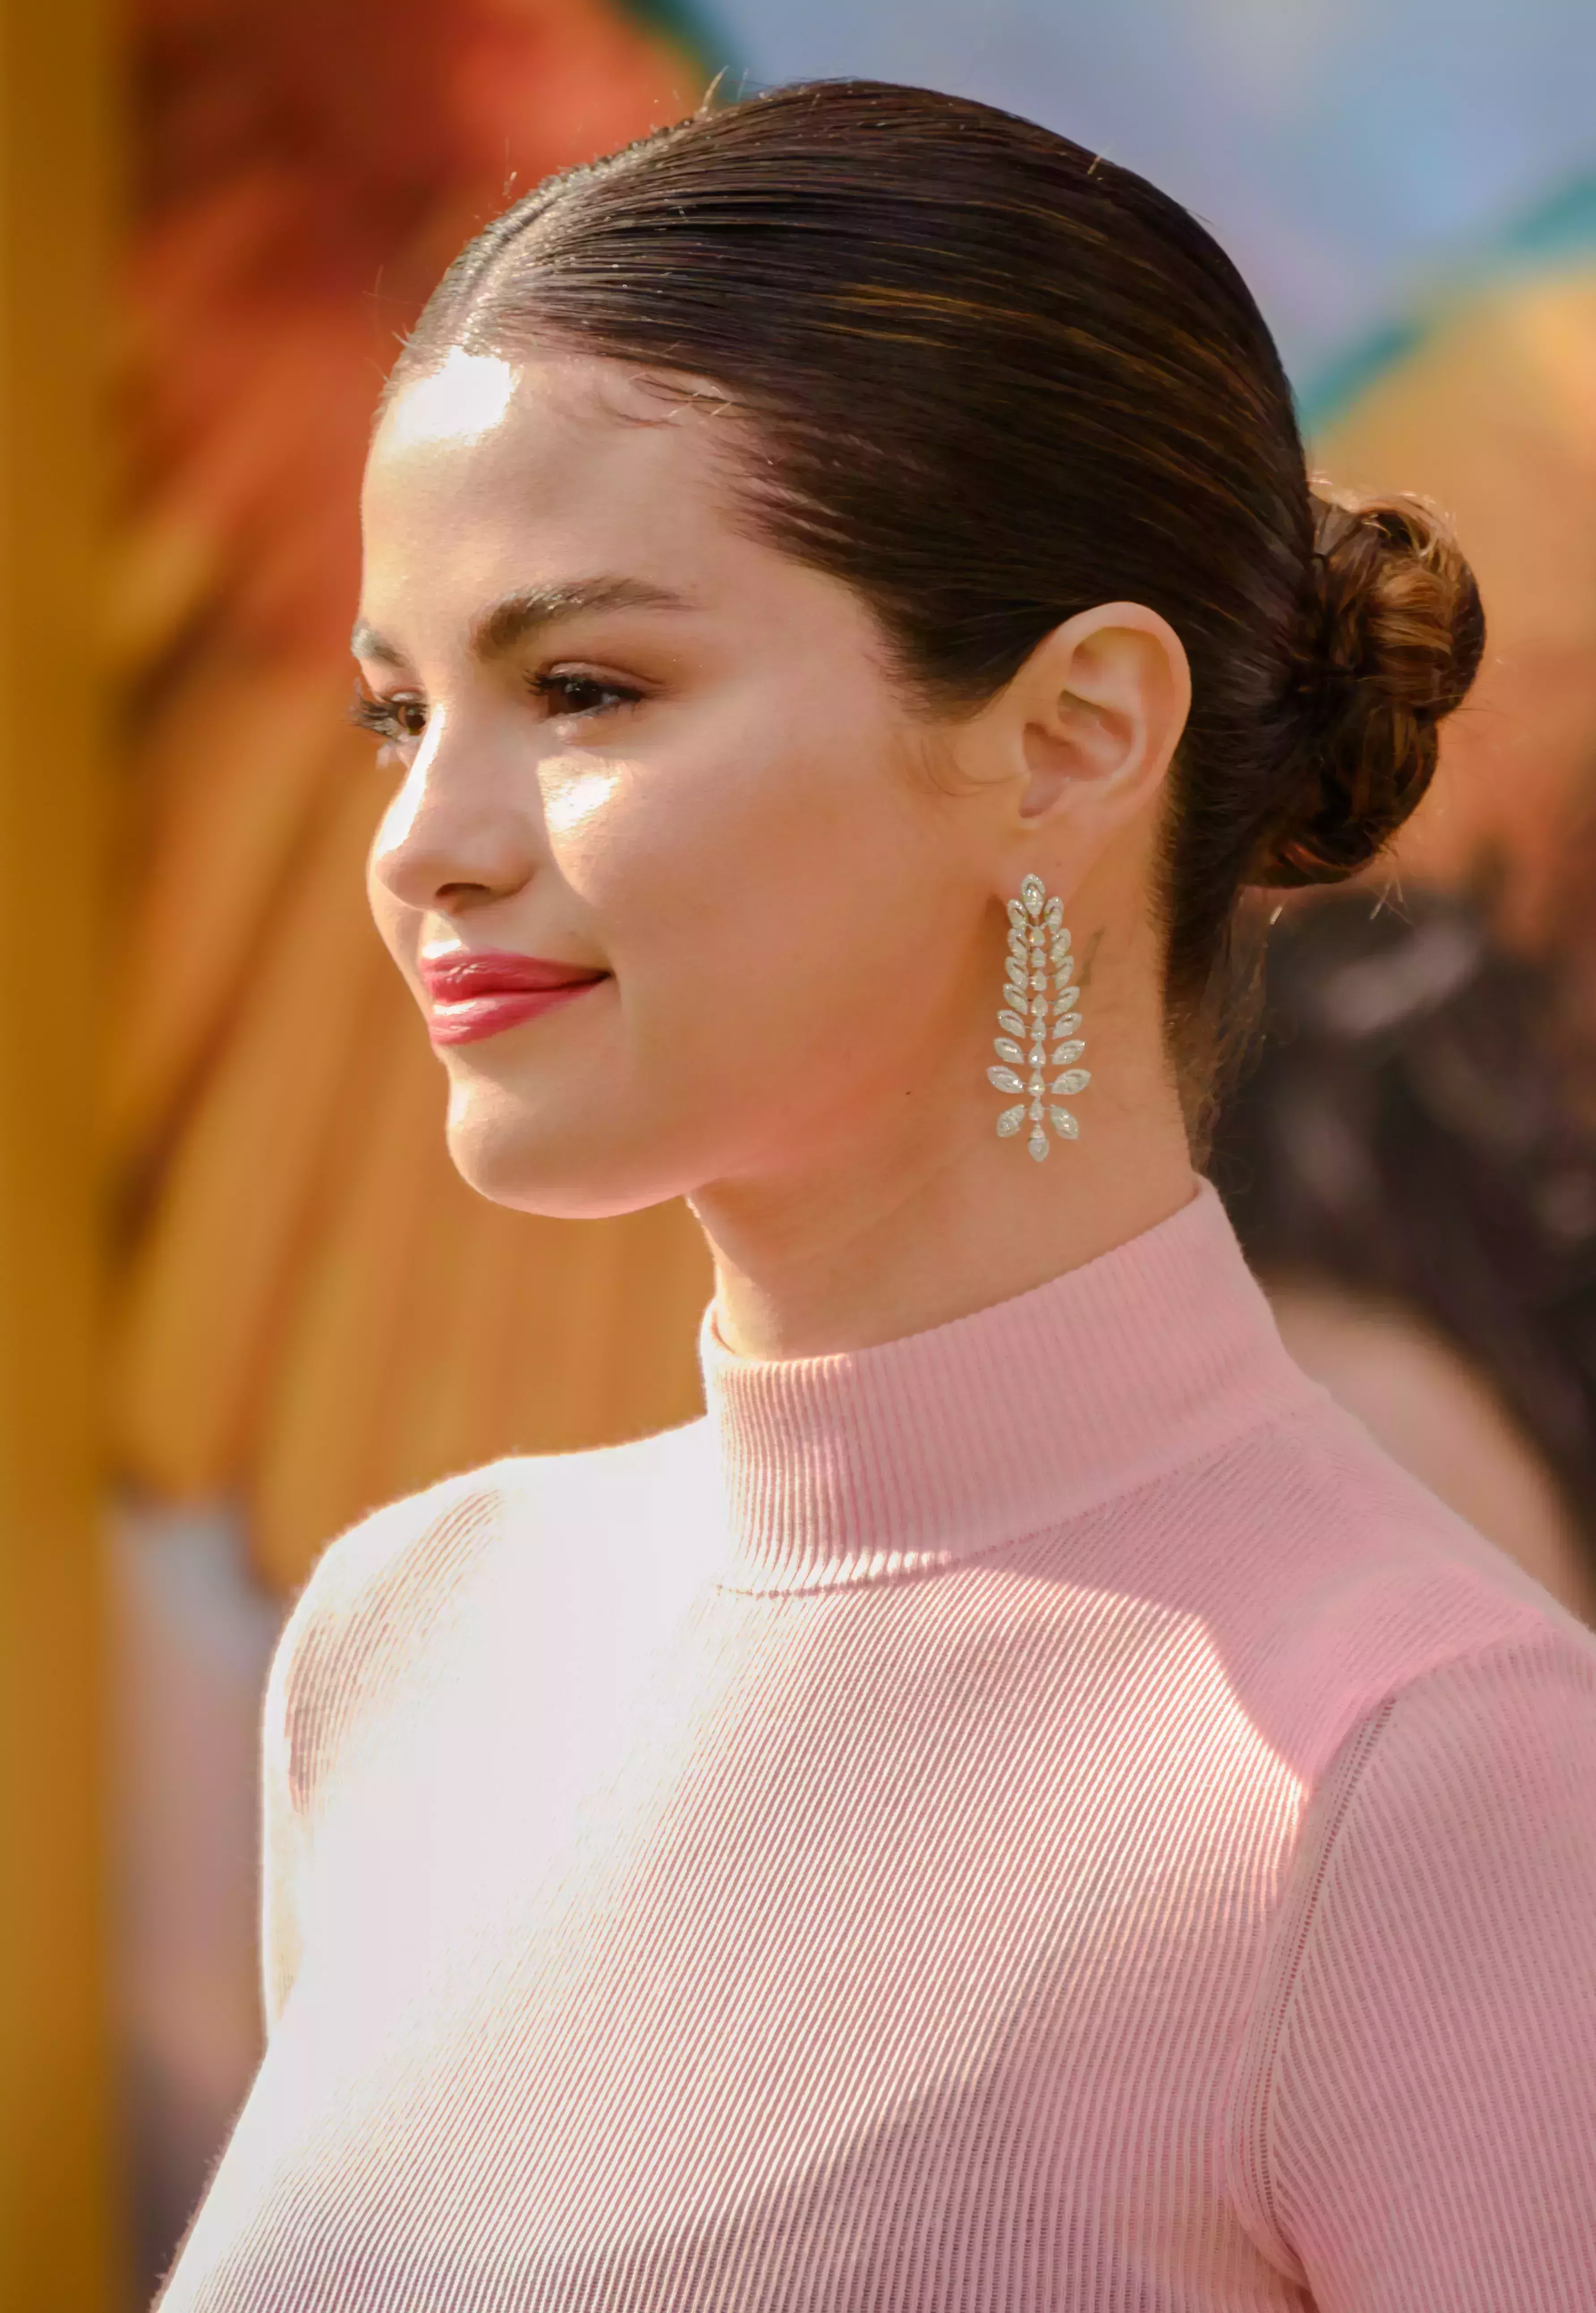 Selena Gomez Parting it in the Middle for the Bun